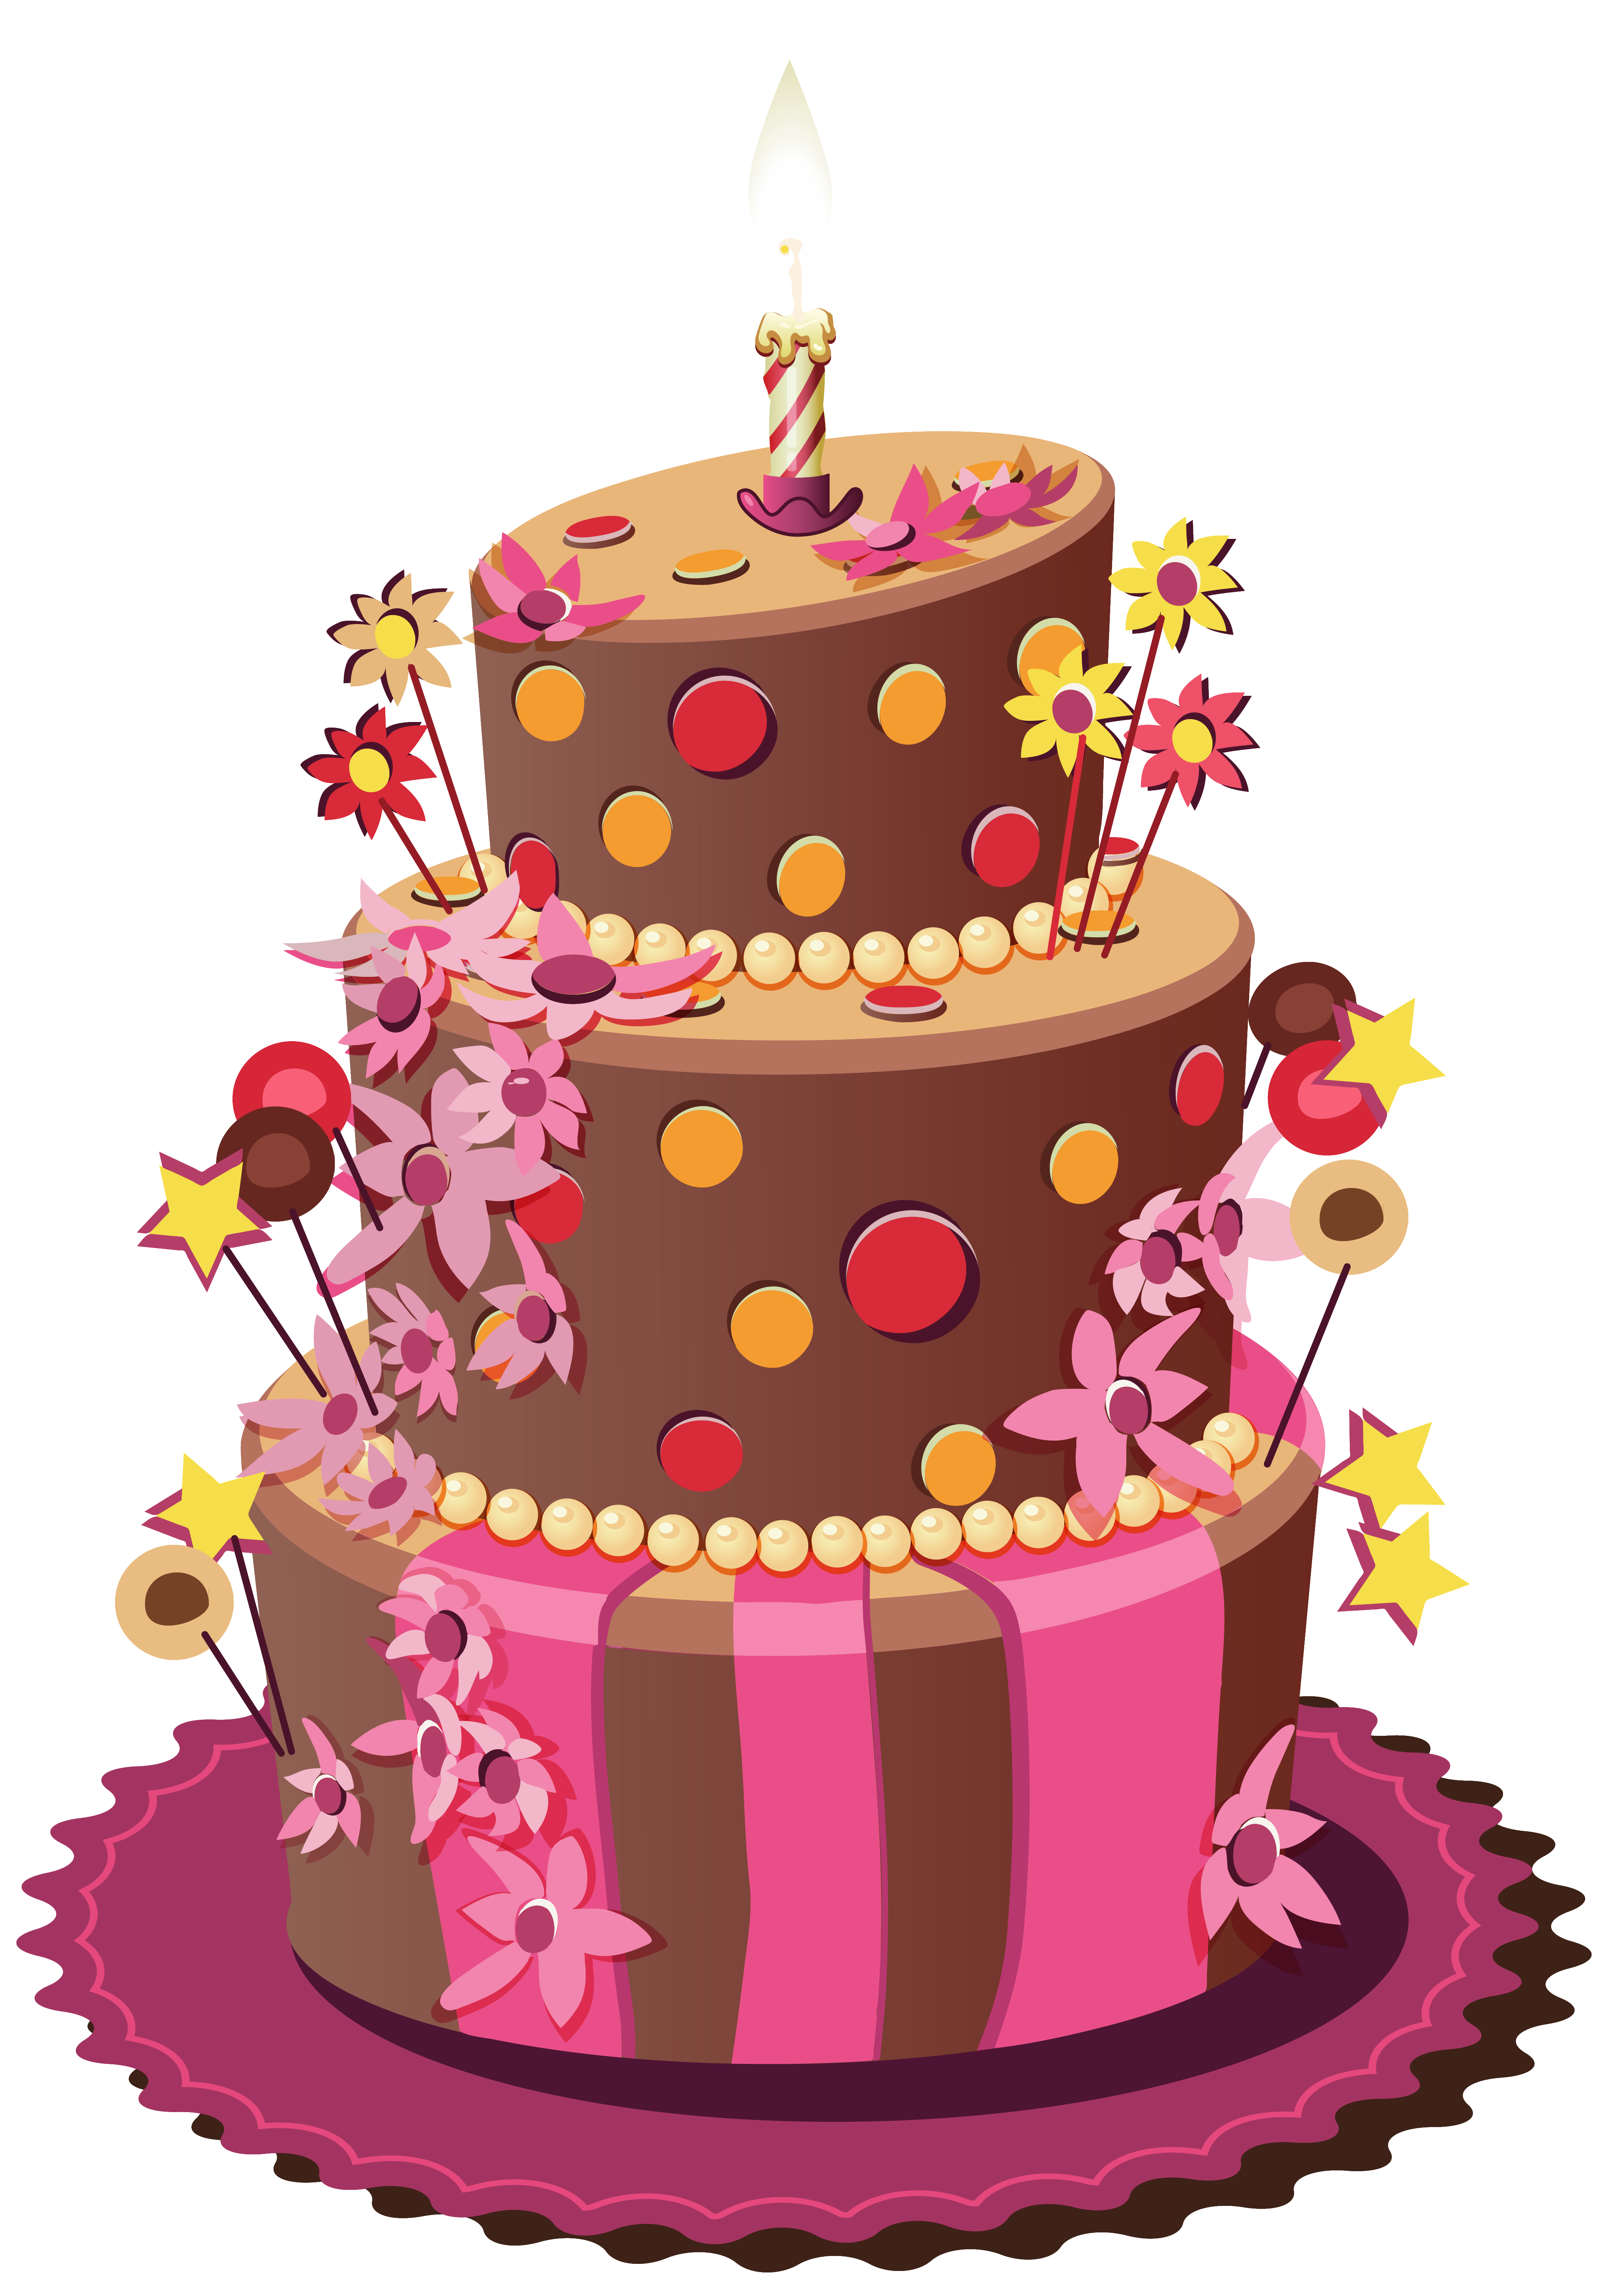 Download Delicious Cake Images - Free Stock Photos & Pictures - Pixabay